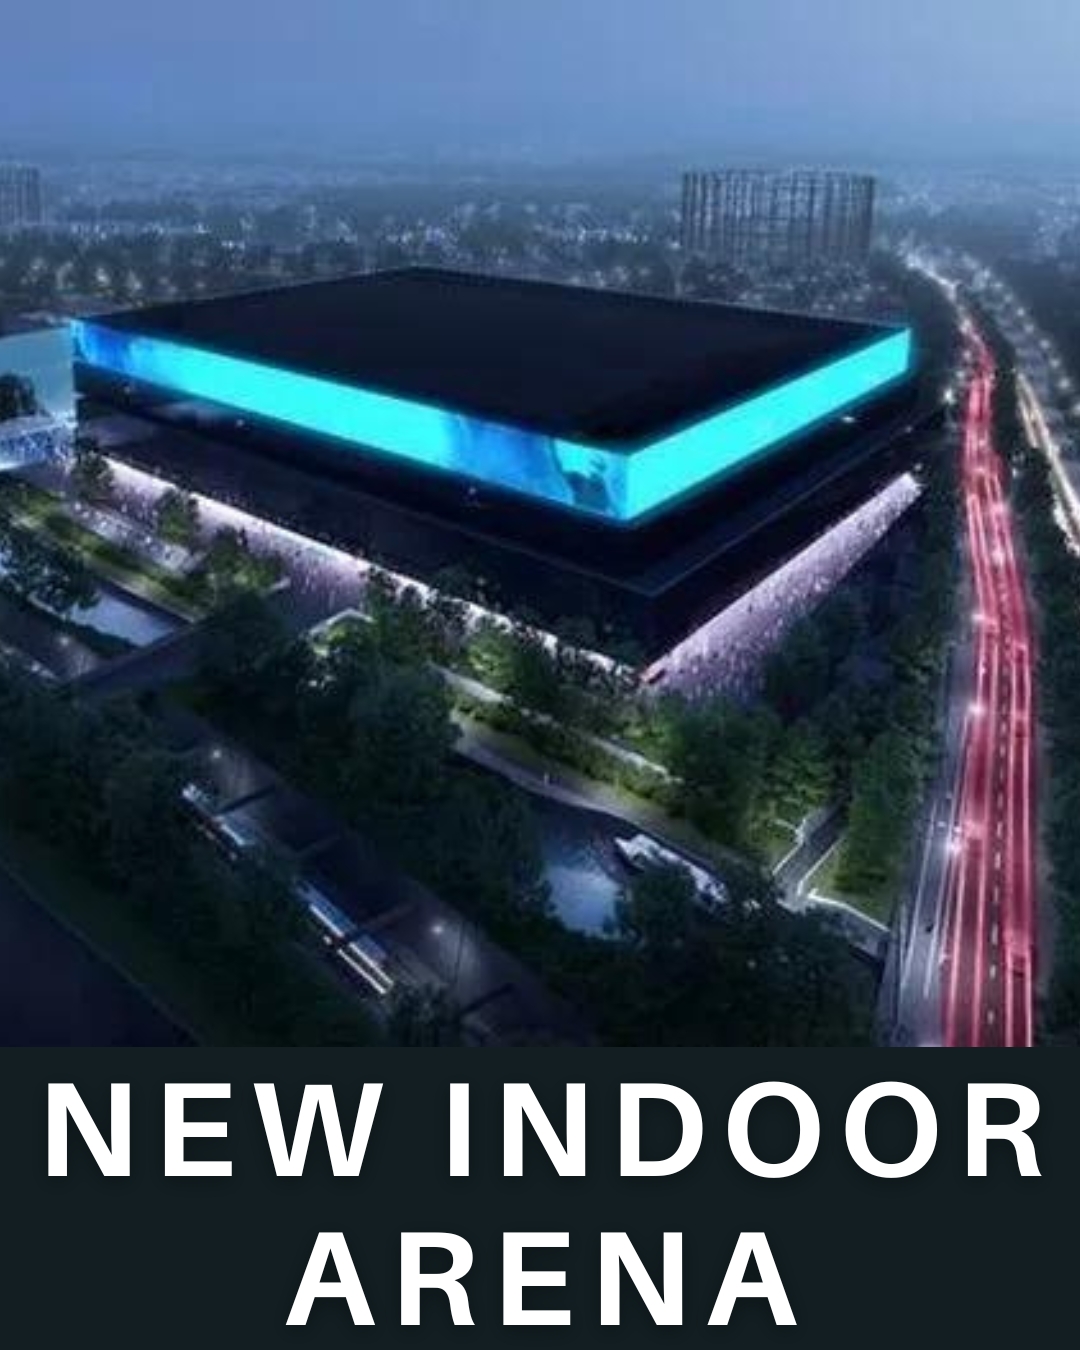 The new indoor arena to be built before the European championships will make the city a music & boxing hub